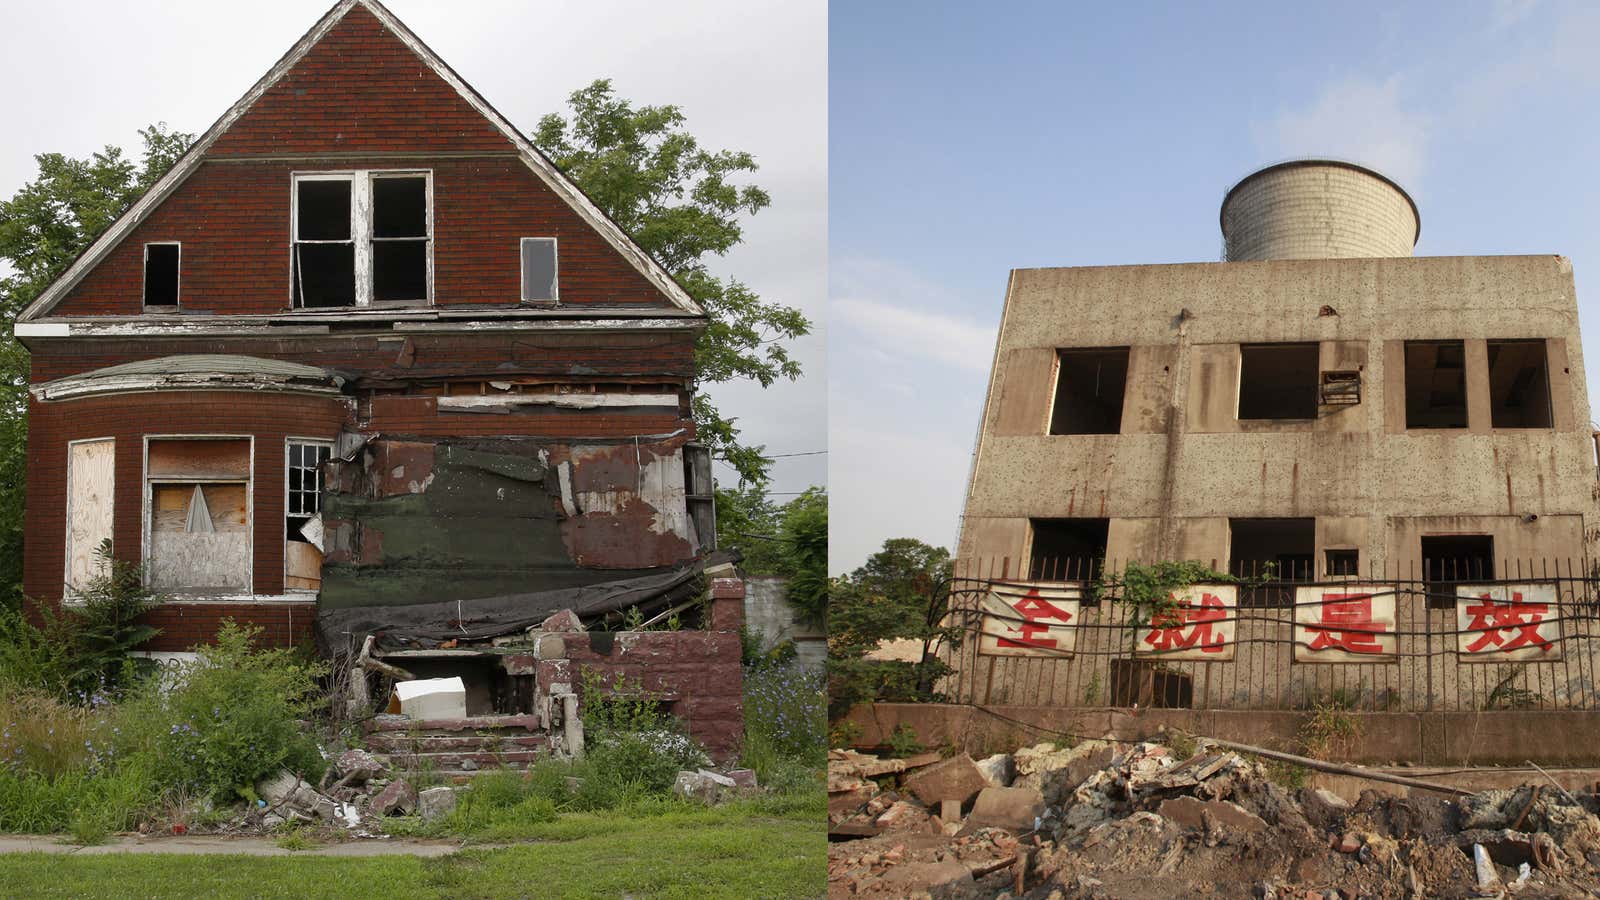 Abandoned buildings in Detroit (left) and Wuxi (right).